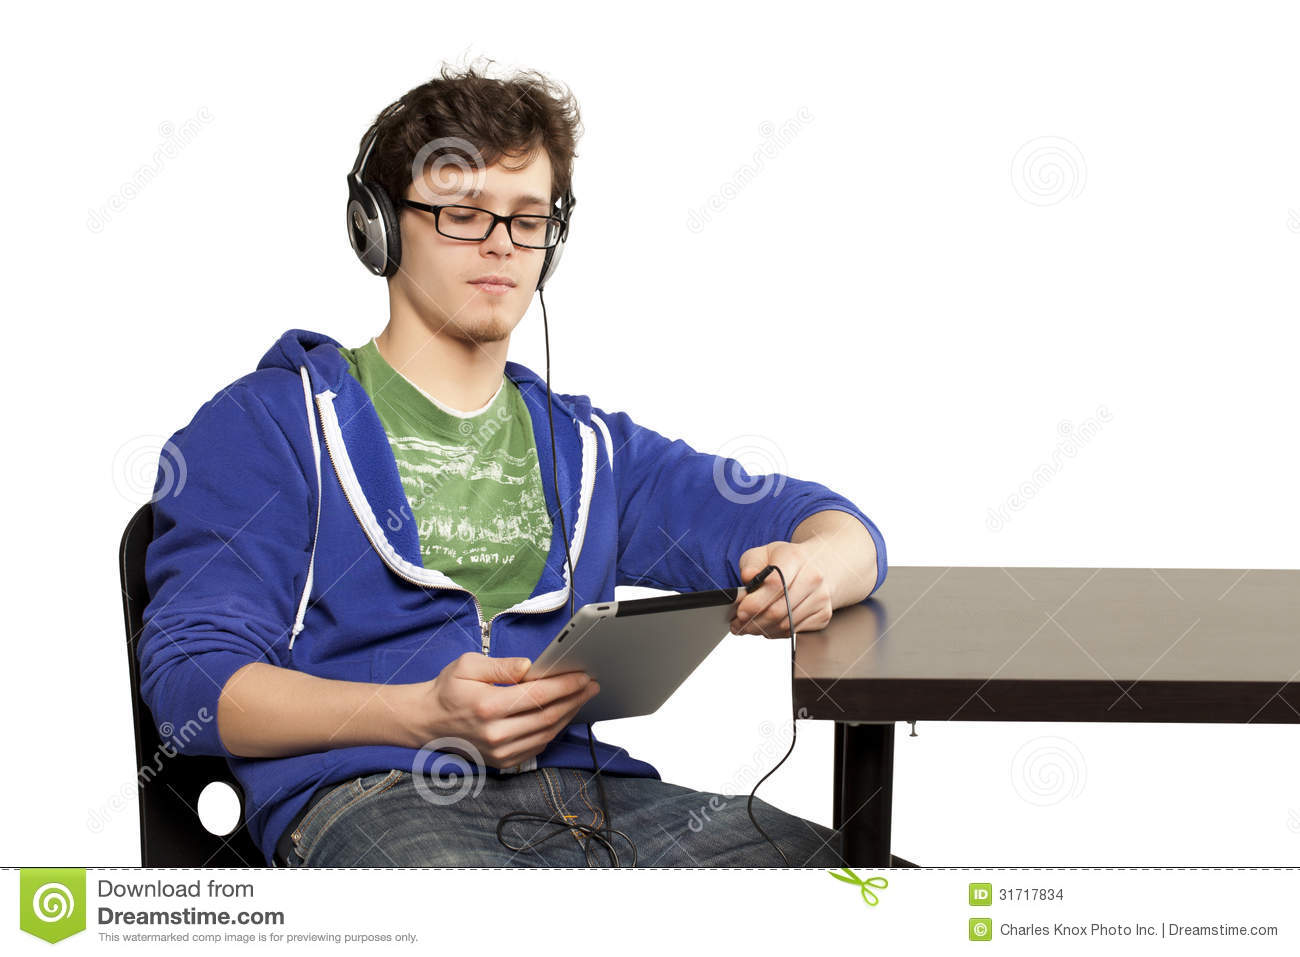 Student Sitting At Table Using Computer Stock Images   Image  31717834